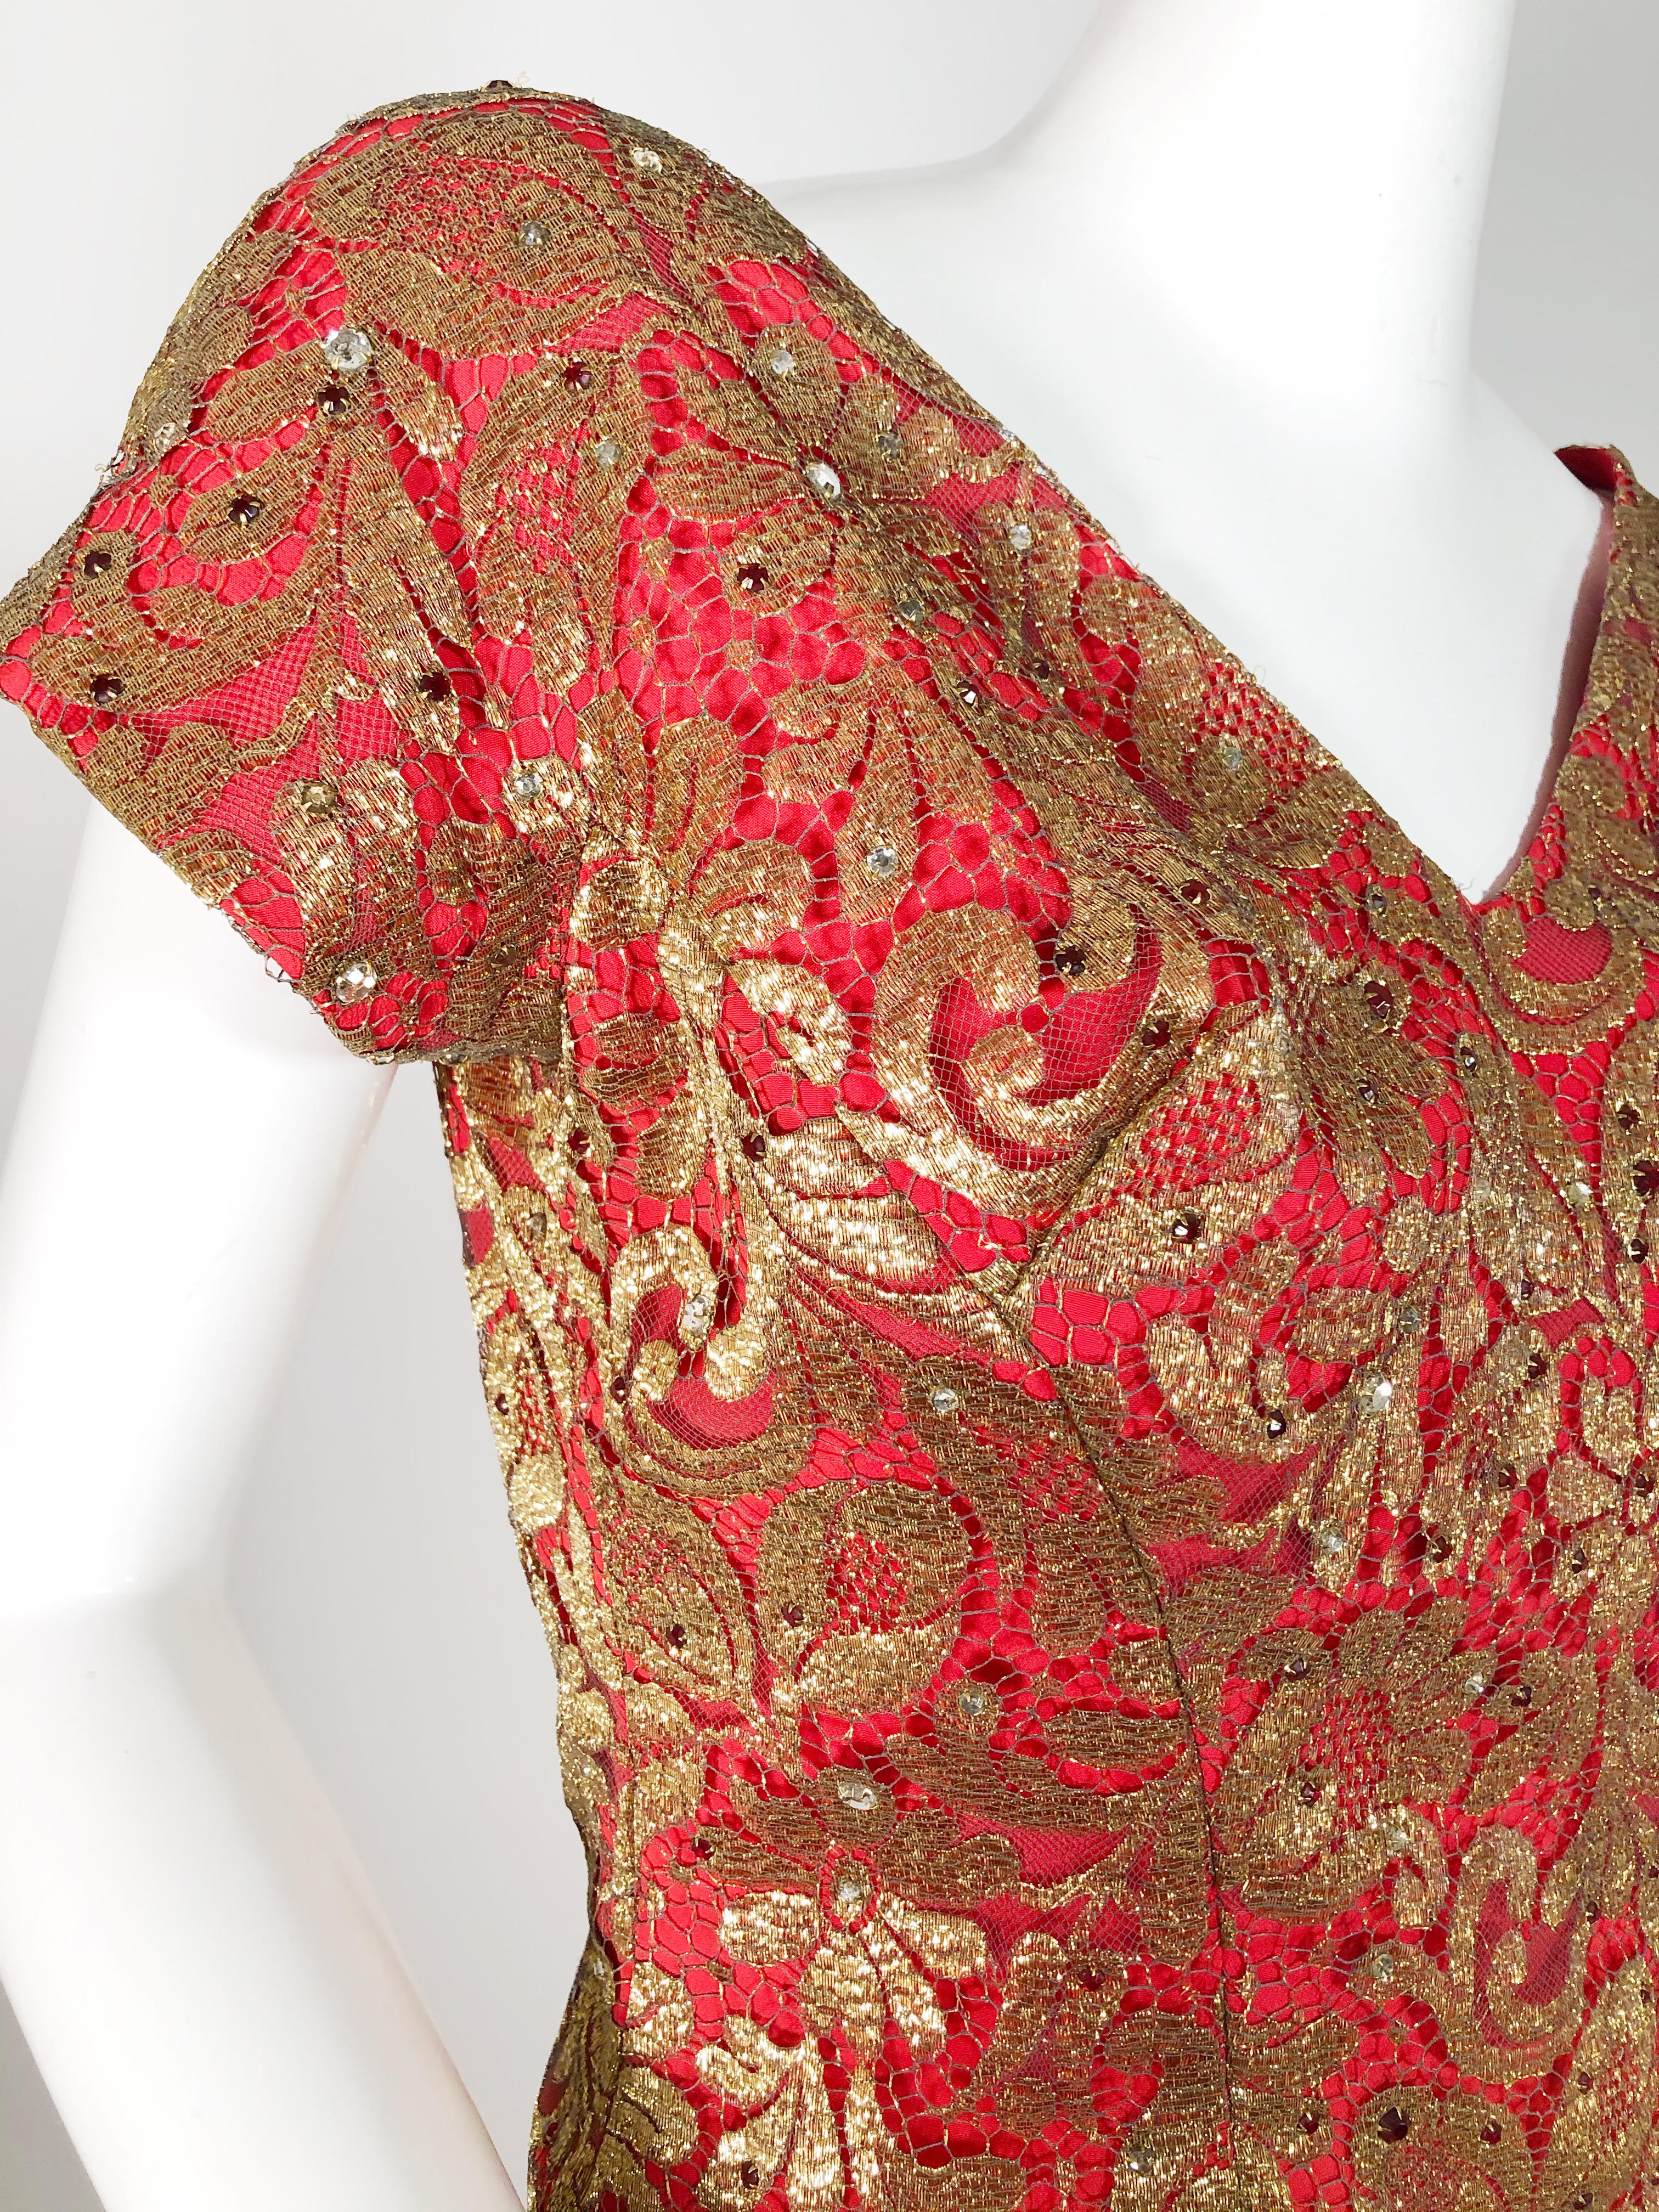 Brown 1950s Red Sheath Dress with Beautiful Gold Lame Lace Overlay and Crimson Stones